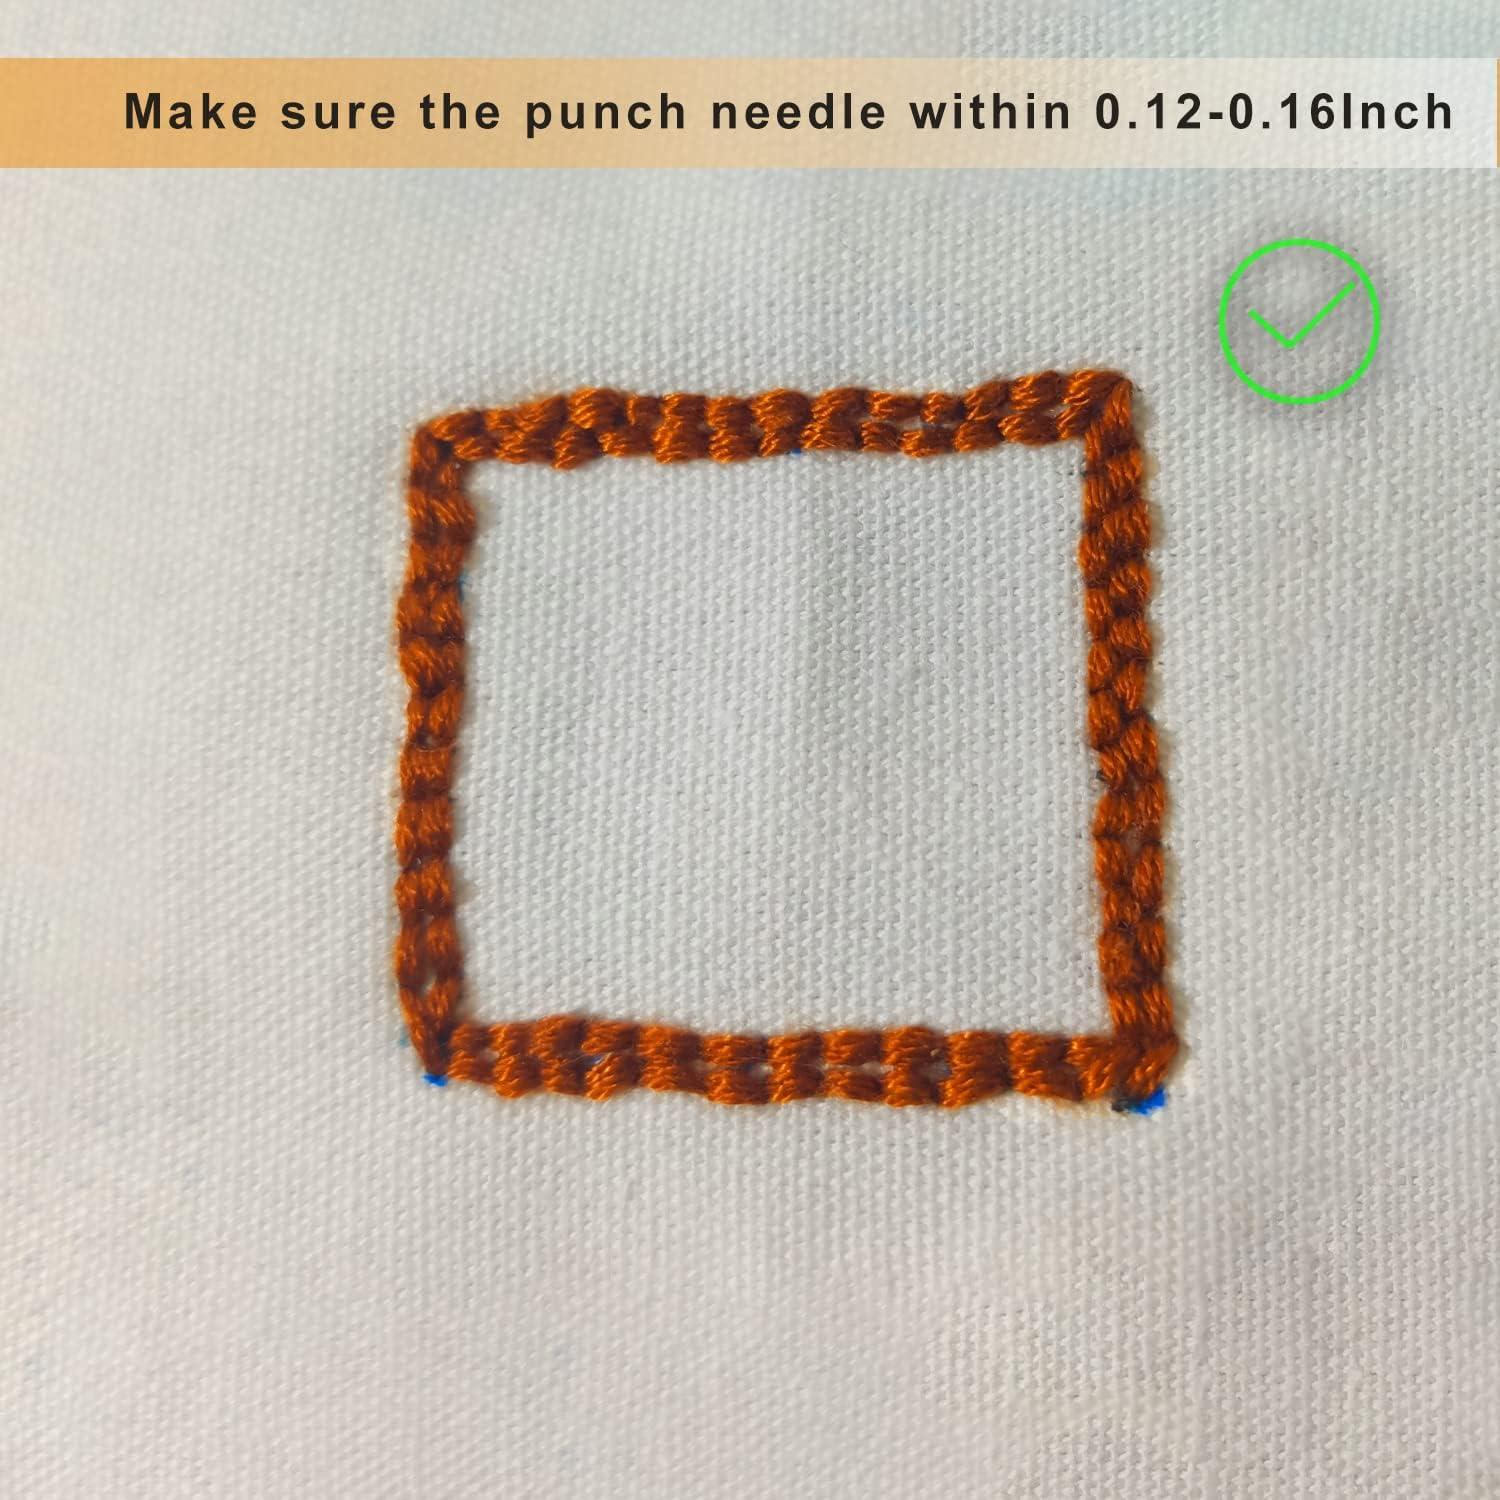 Punch Needle Embroidery Starter Kits For Adults Beginners Punch